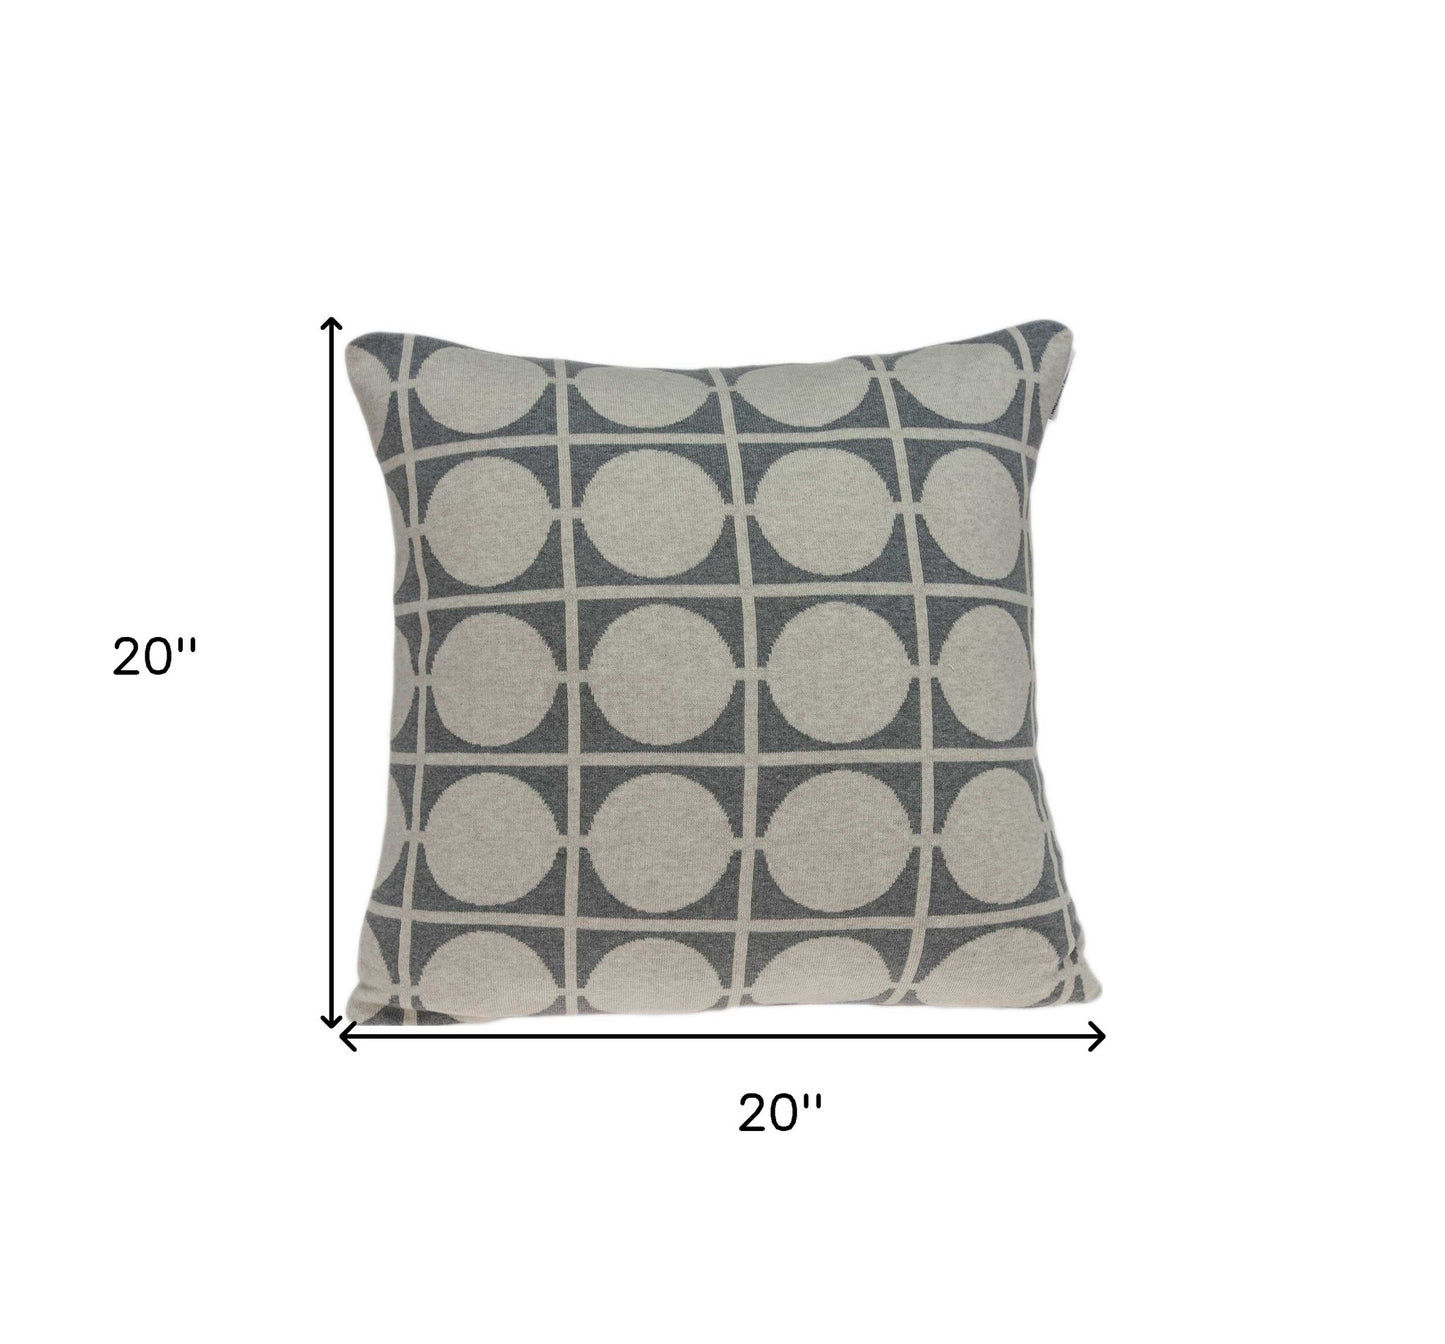 20" X 7" X 20" Transitional Tan & Grey Pillow Cover With Poly Insert